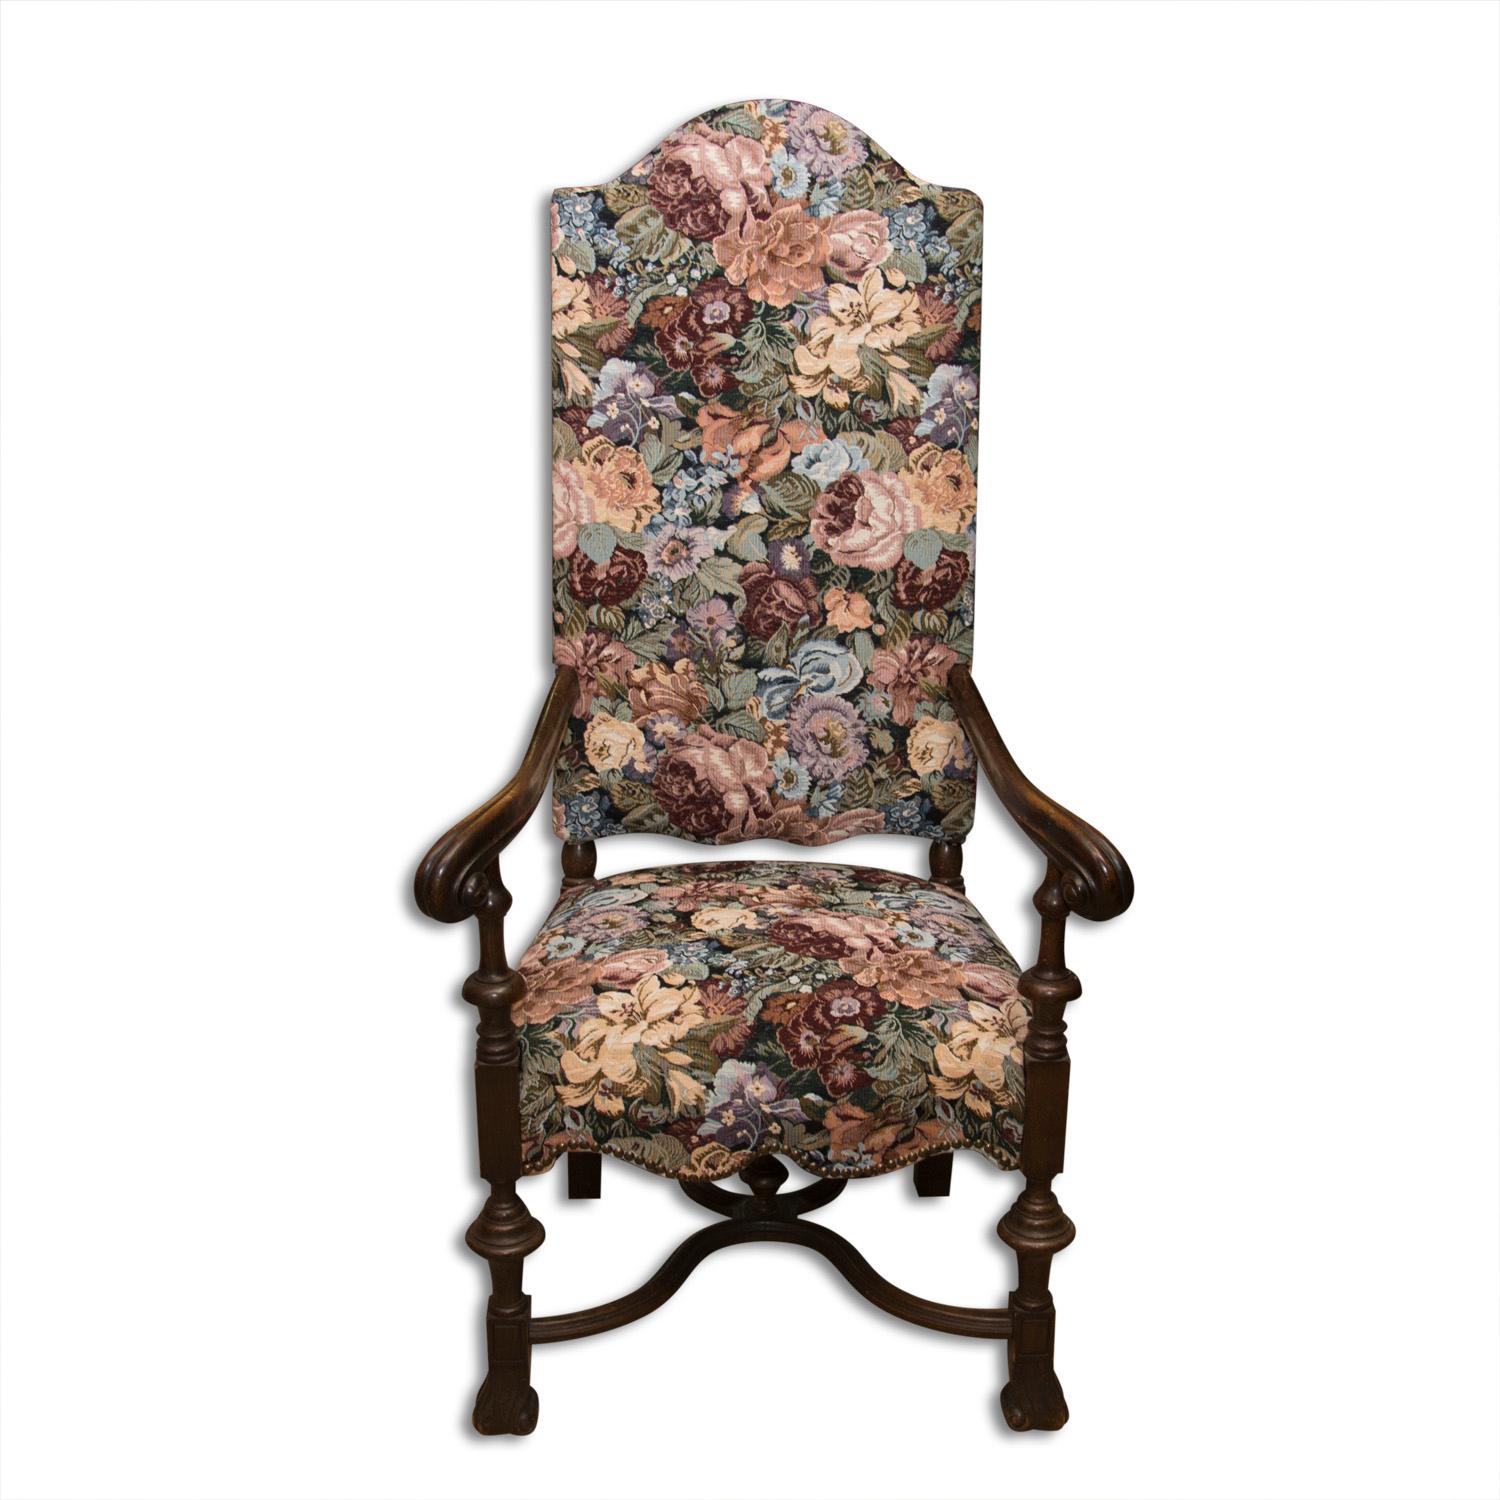 It was made of walnut wood by a skilled carver in the second half of the 19th century. Quality wide and comfortable armchair made in the spirit of aristocratic romanticism. It is decorated with elegantly shaped and wide-spread armrests with a cut